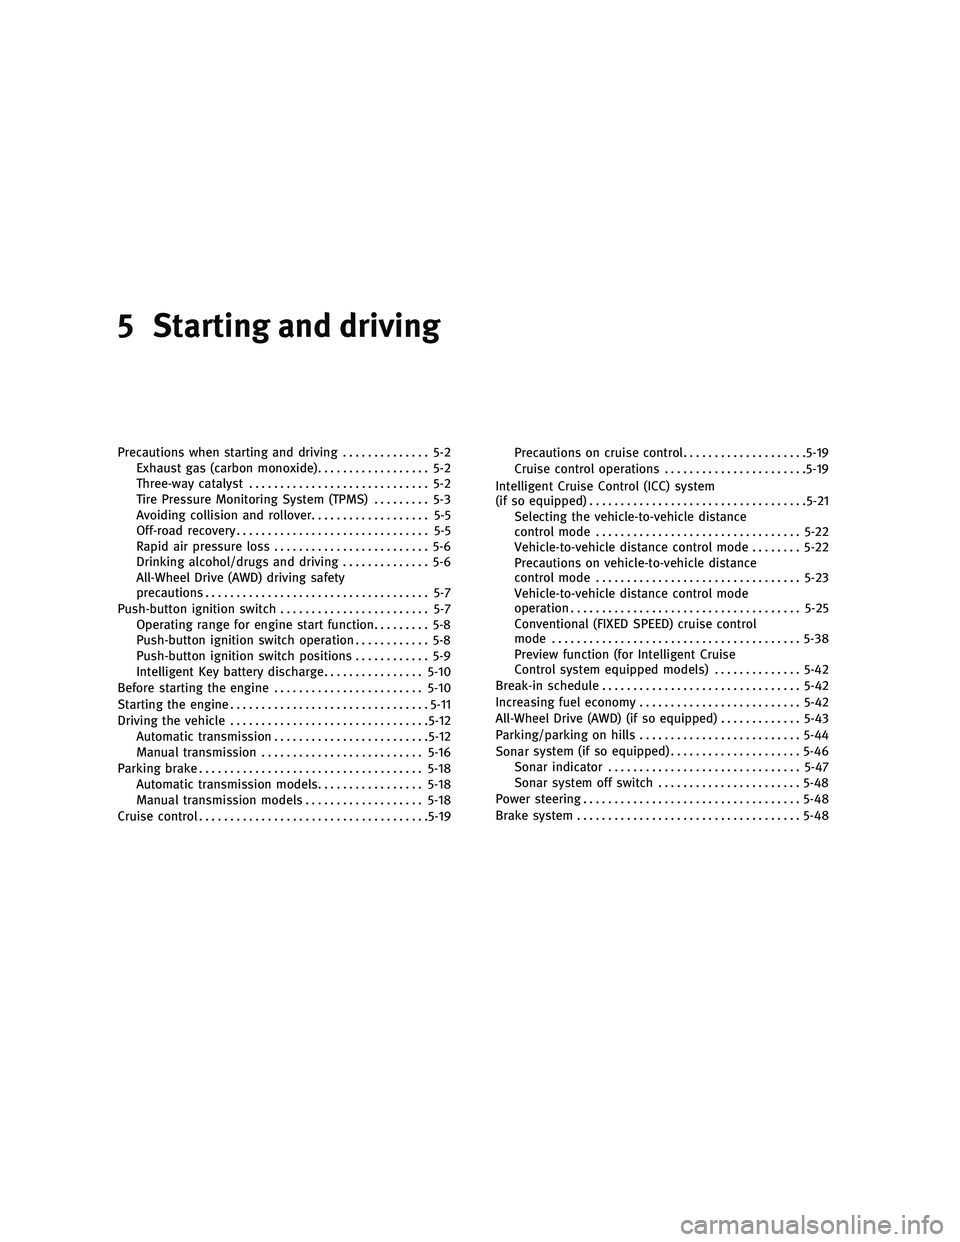 INFINITI G 2010  Owners Manual 5 Starting and driving
Precautions when starting and driving.............. 5-2
Exhaust gas (carbon monoxide) .................. 5-2
Three-way catalyst ............................. 5-2
Tire Pressure M